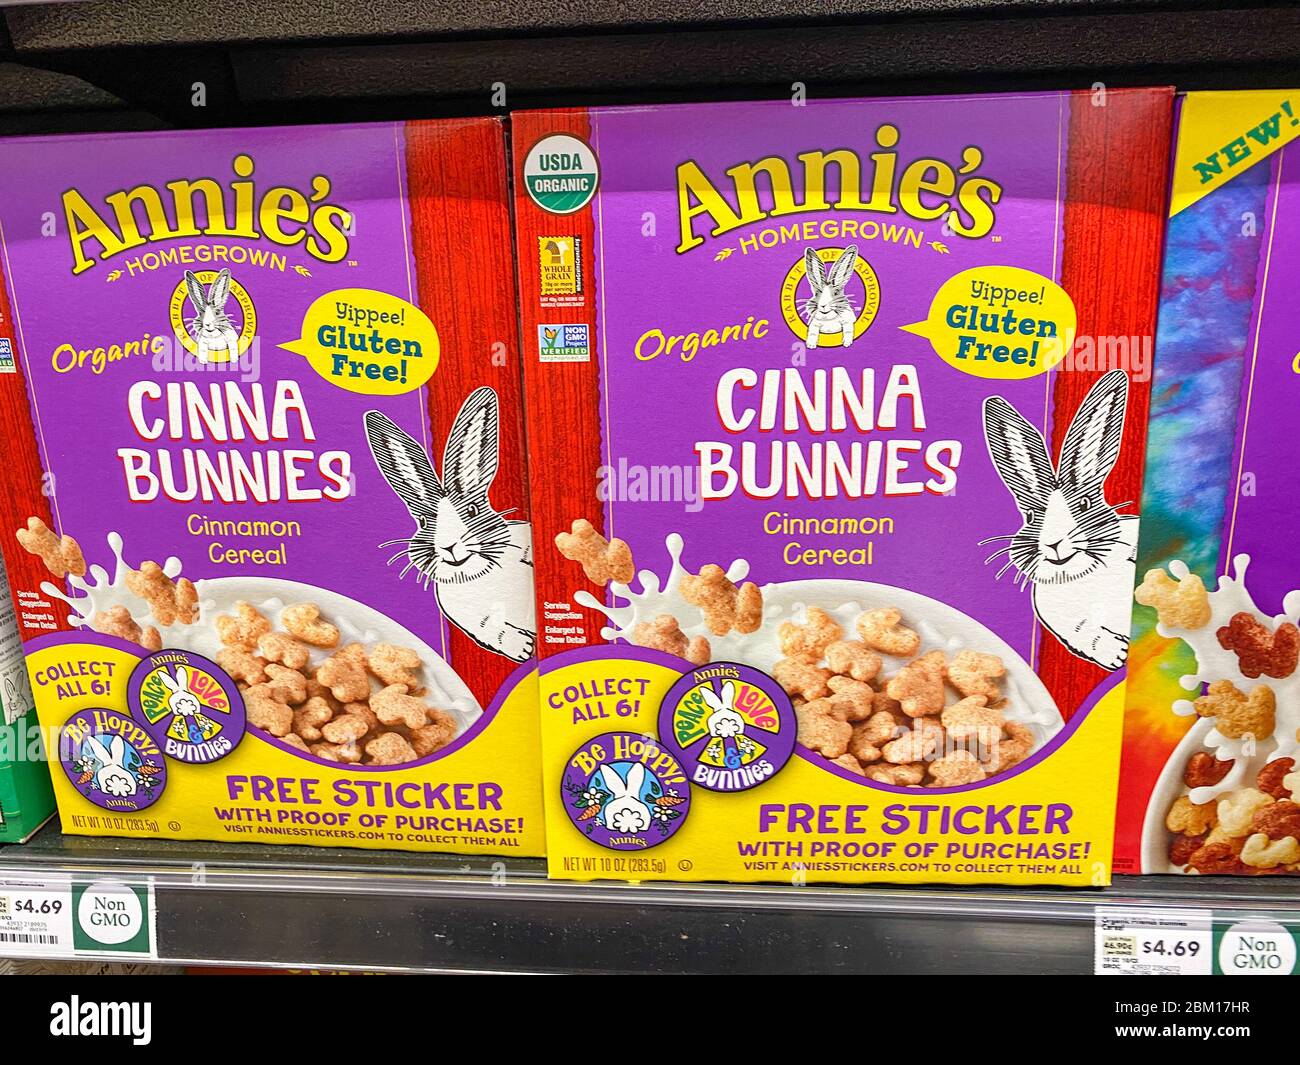 Orlando,FL/USA-5/3/20: Annie's Homegrown Cinna Bunnies Cereal at a Whole Foods Market Grocery Store. Stock Photo